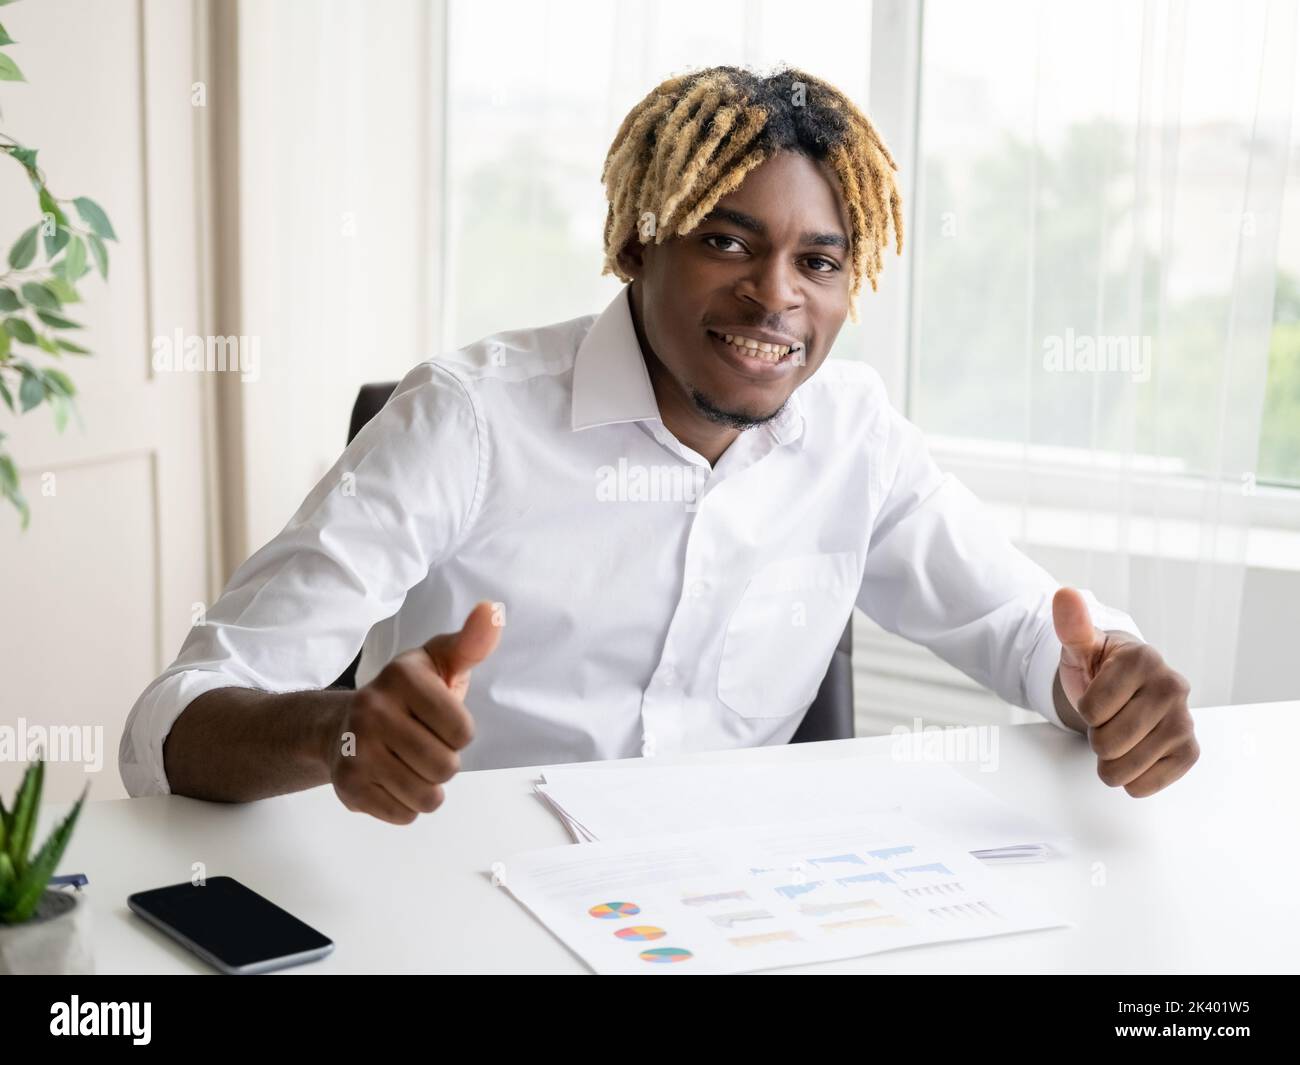 Successful result. Happy black man. Enjoying work. Positive smart casual guy sitting office desk showing likes gesture in light room interior. Stock Photo